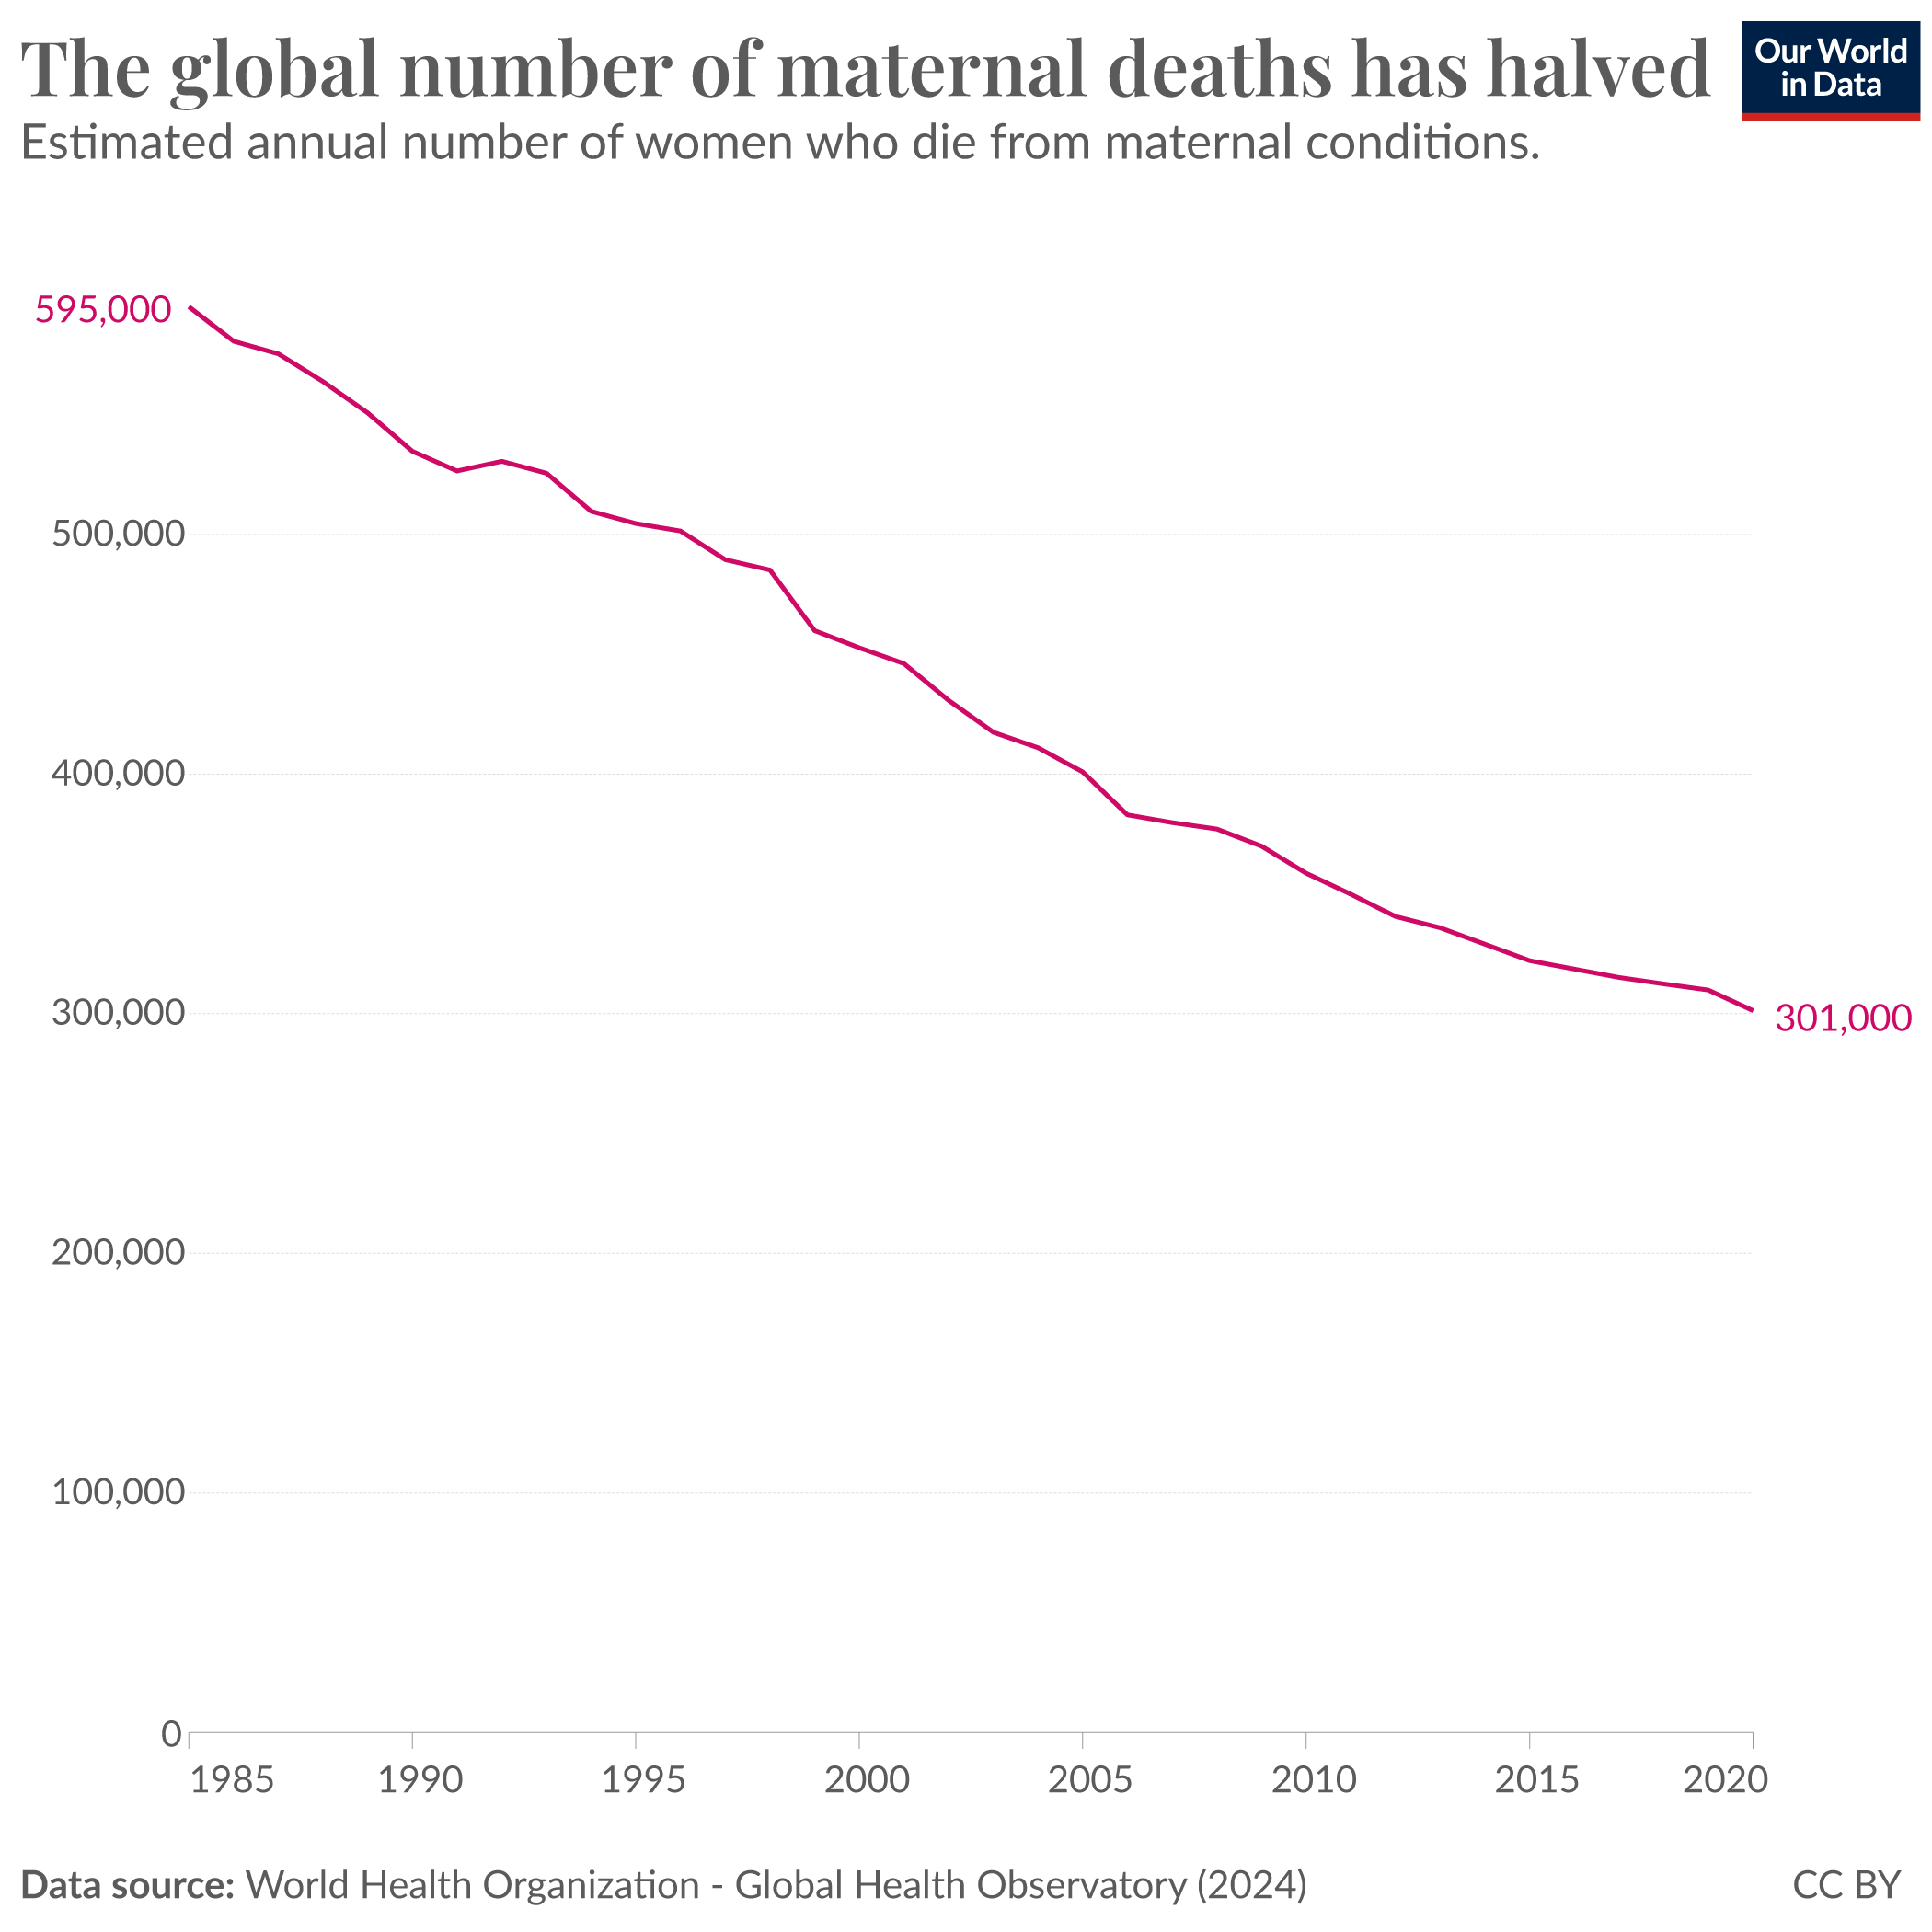 Maternal deaths have halved in the last 35 years